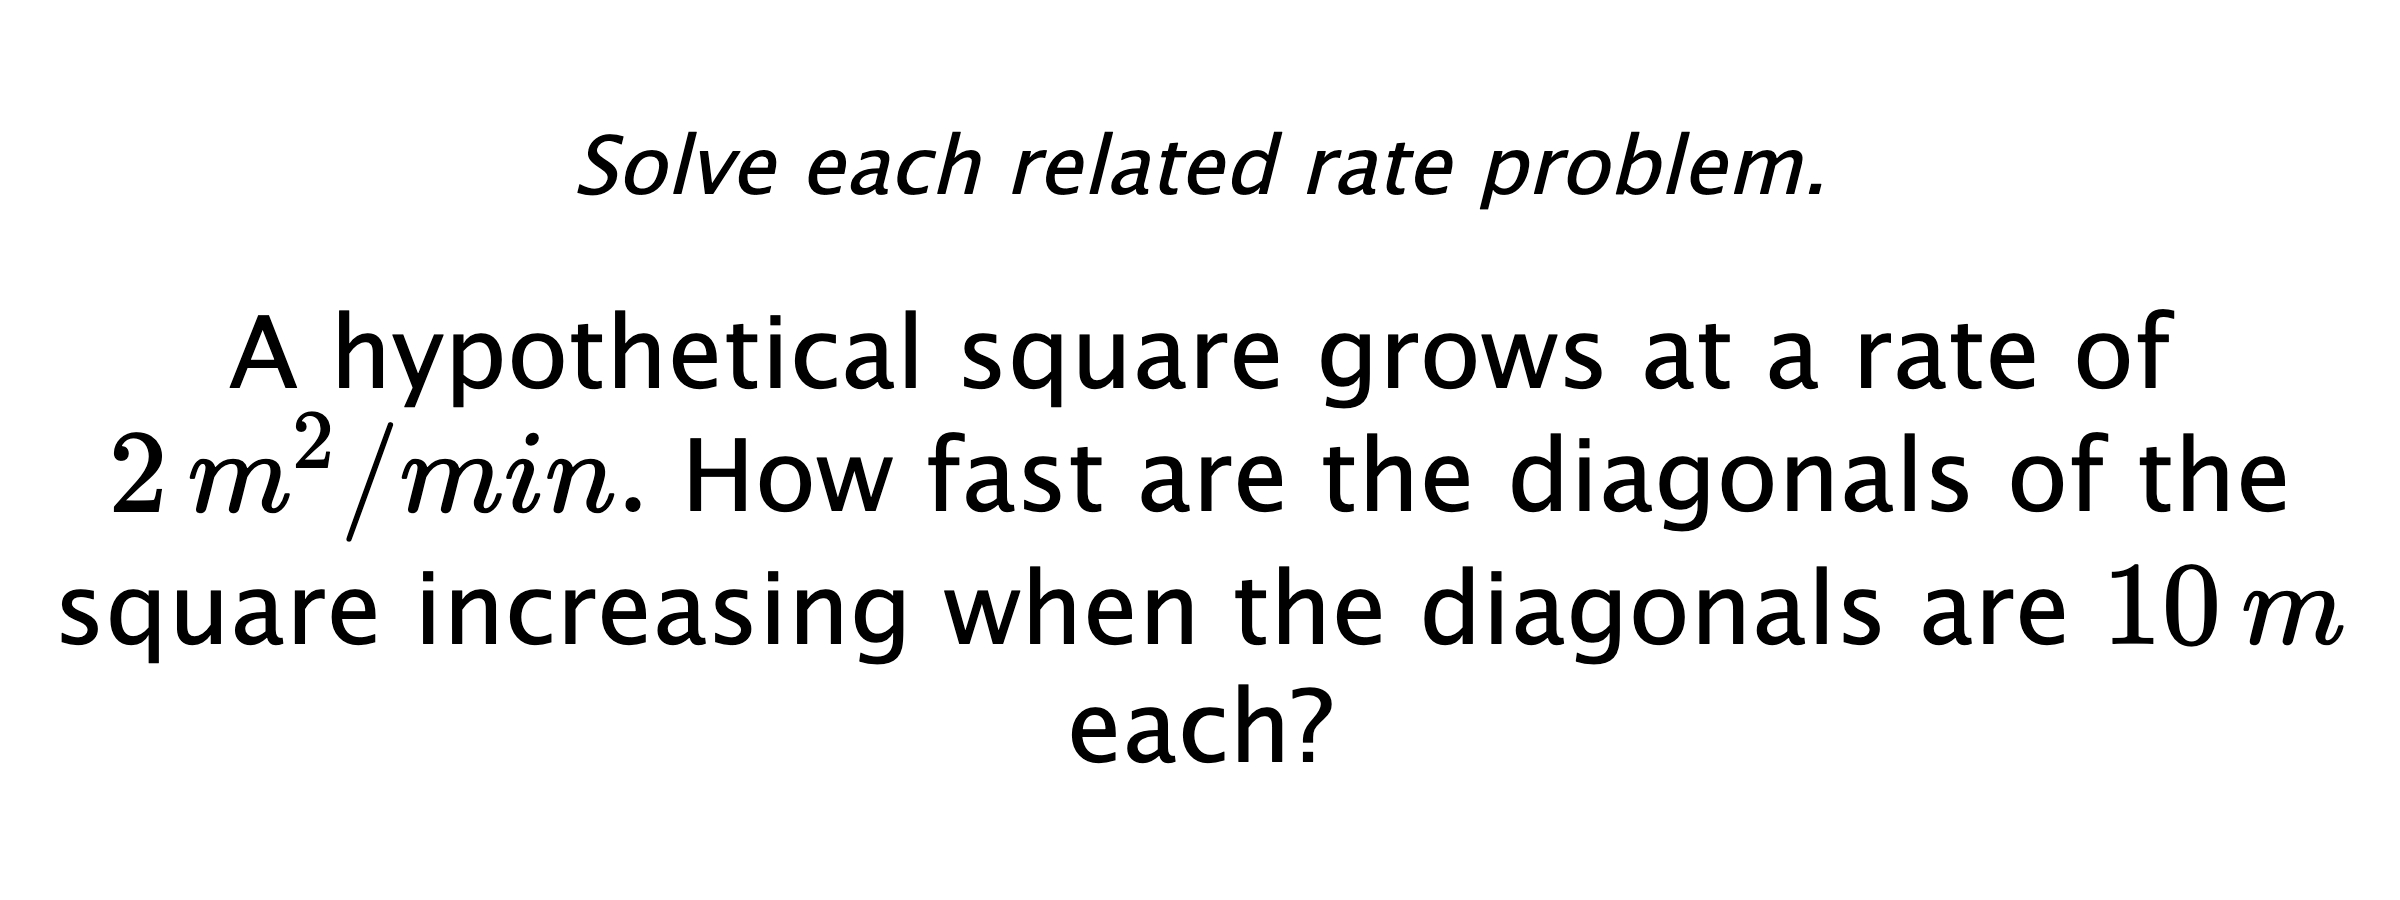 Solve each related rate problem. A hypothetical square grows at a rate of $2\,m^{2}/min.$ How fast are the diagonals of the square increasing when the diagonals are $10\,m$ each?